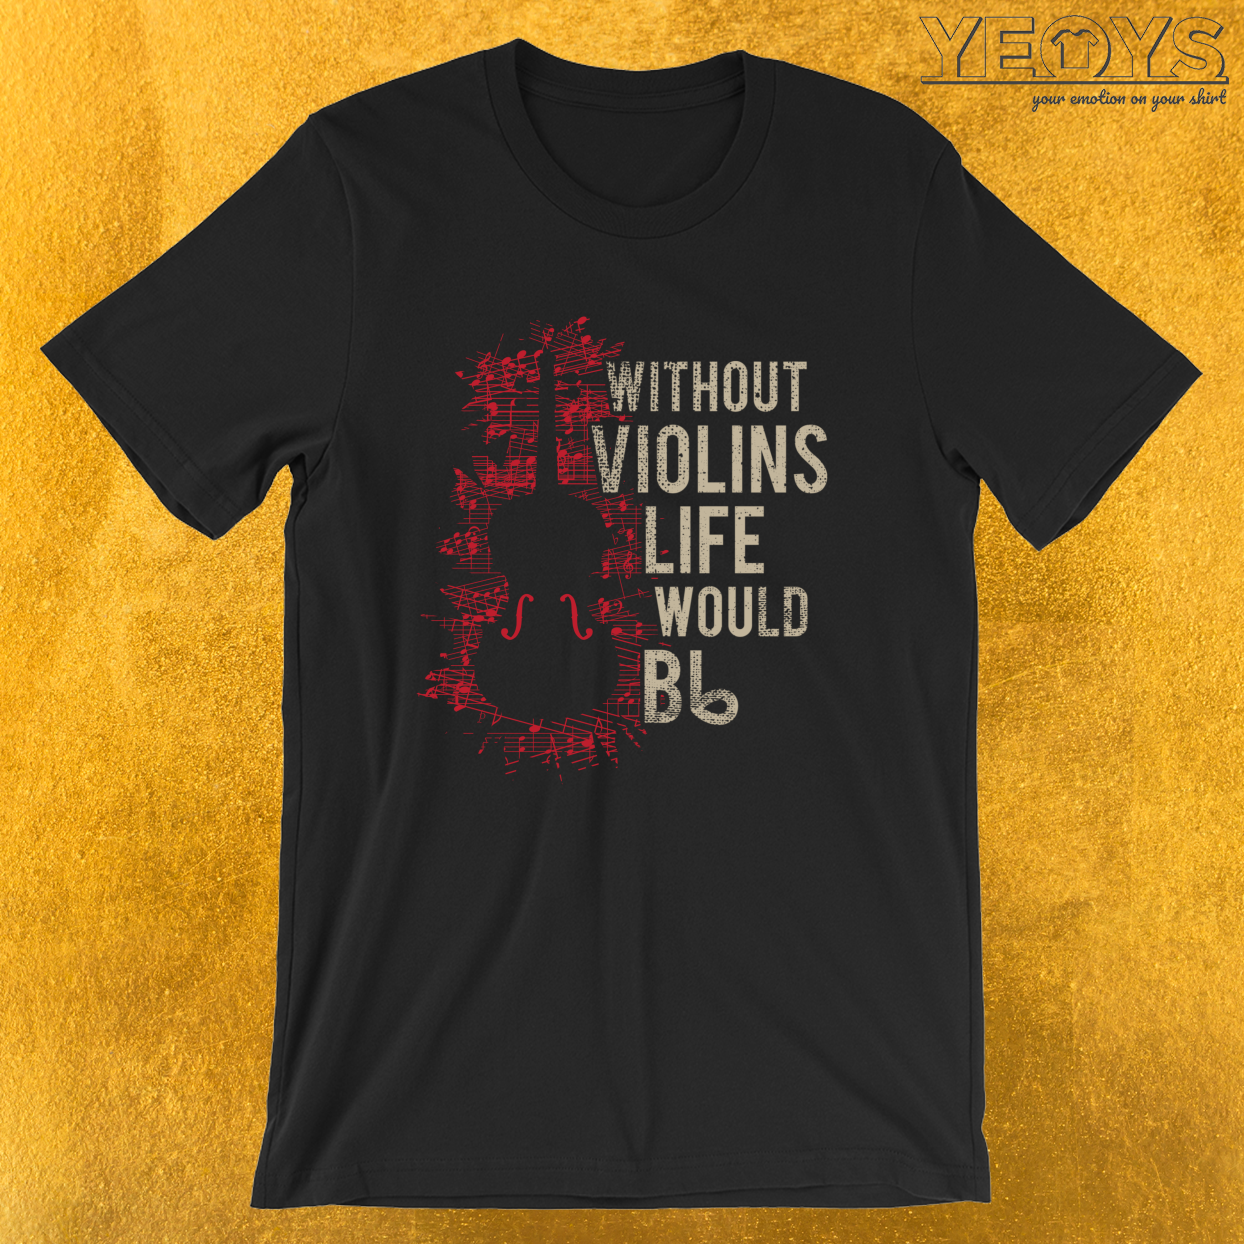 Without Violins Life Would B Flat – Funny Music Quotes Tee